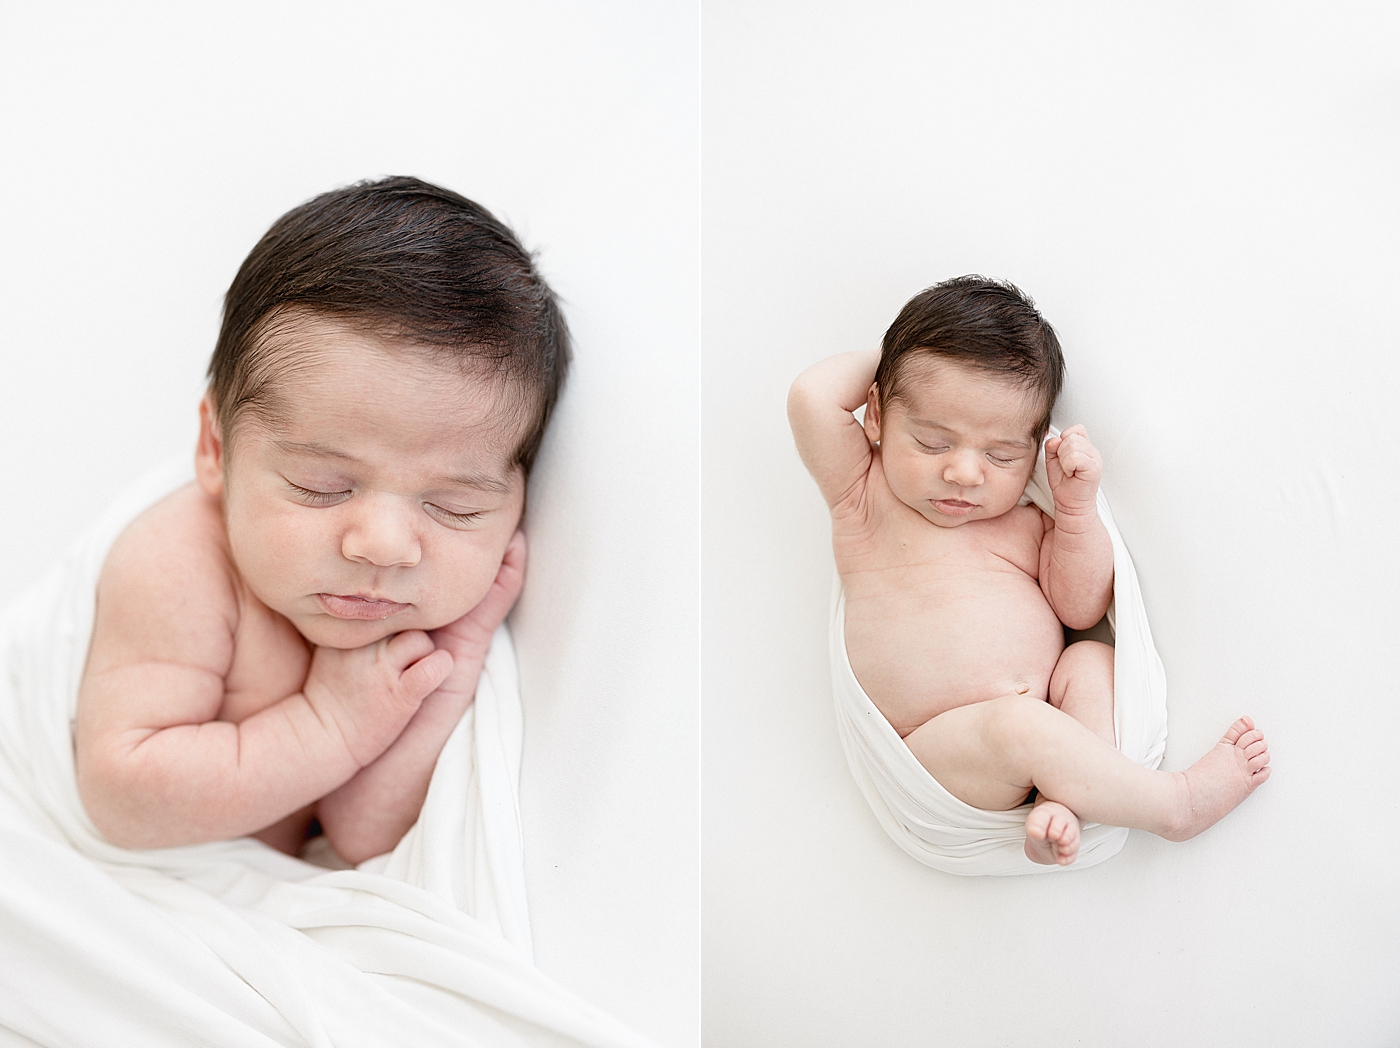 Simple newborn photos in studio in Tampa, Fl. Photo by Brittany Elise Photography.